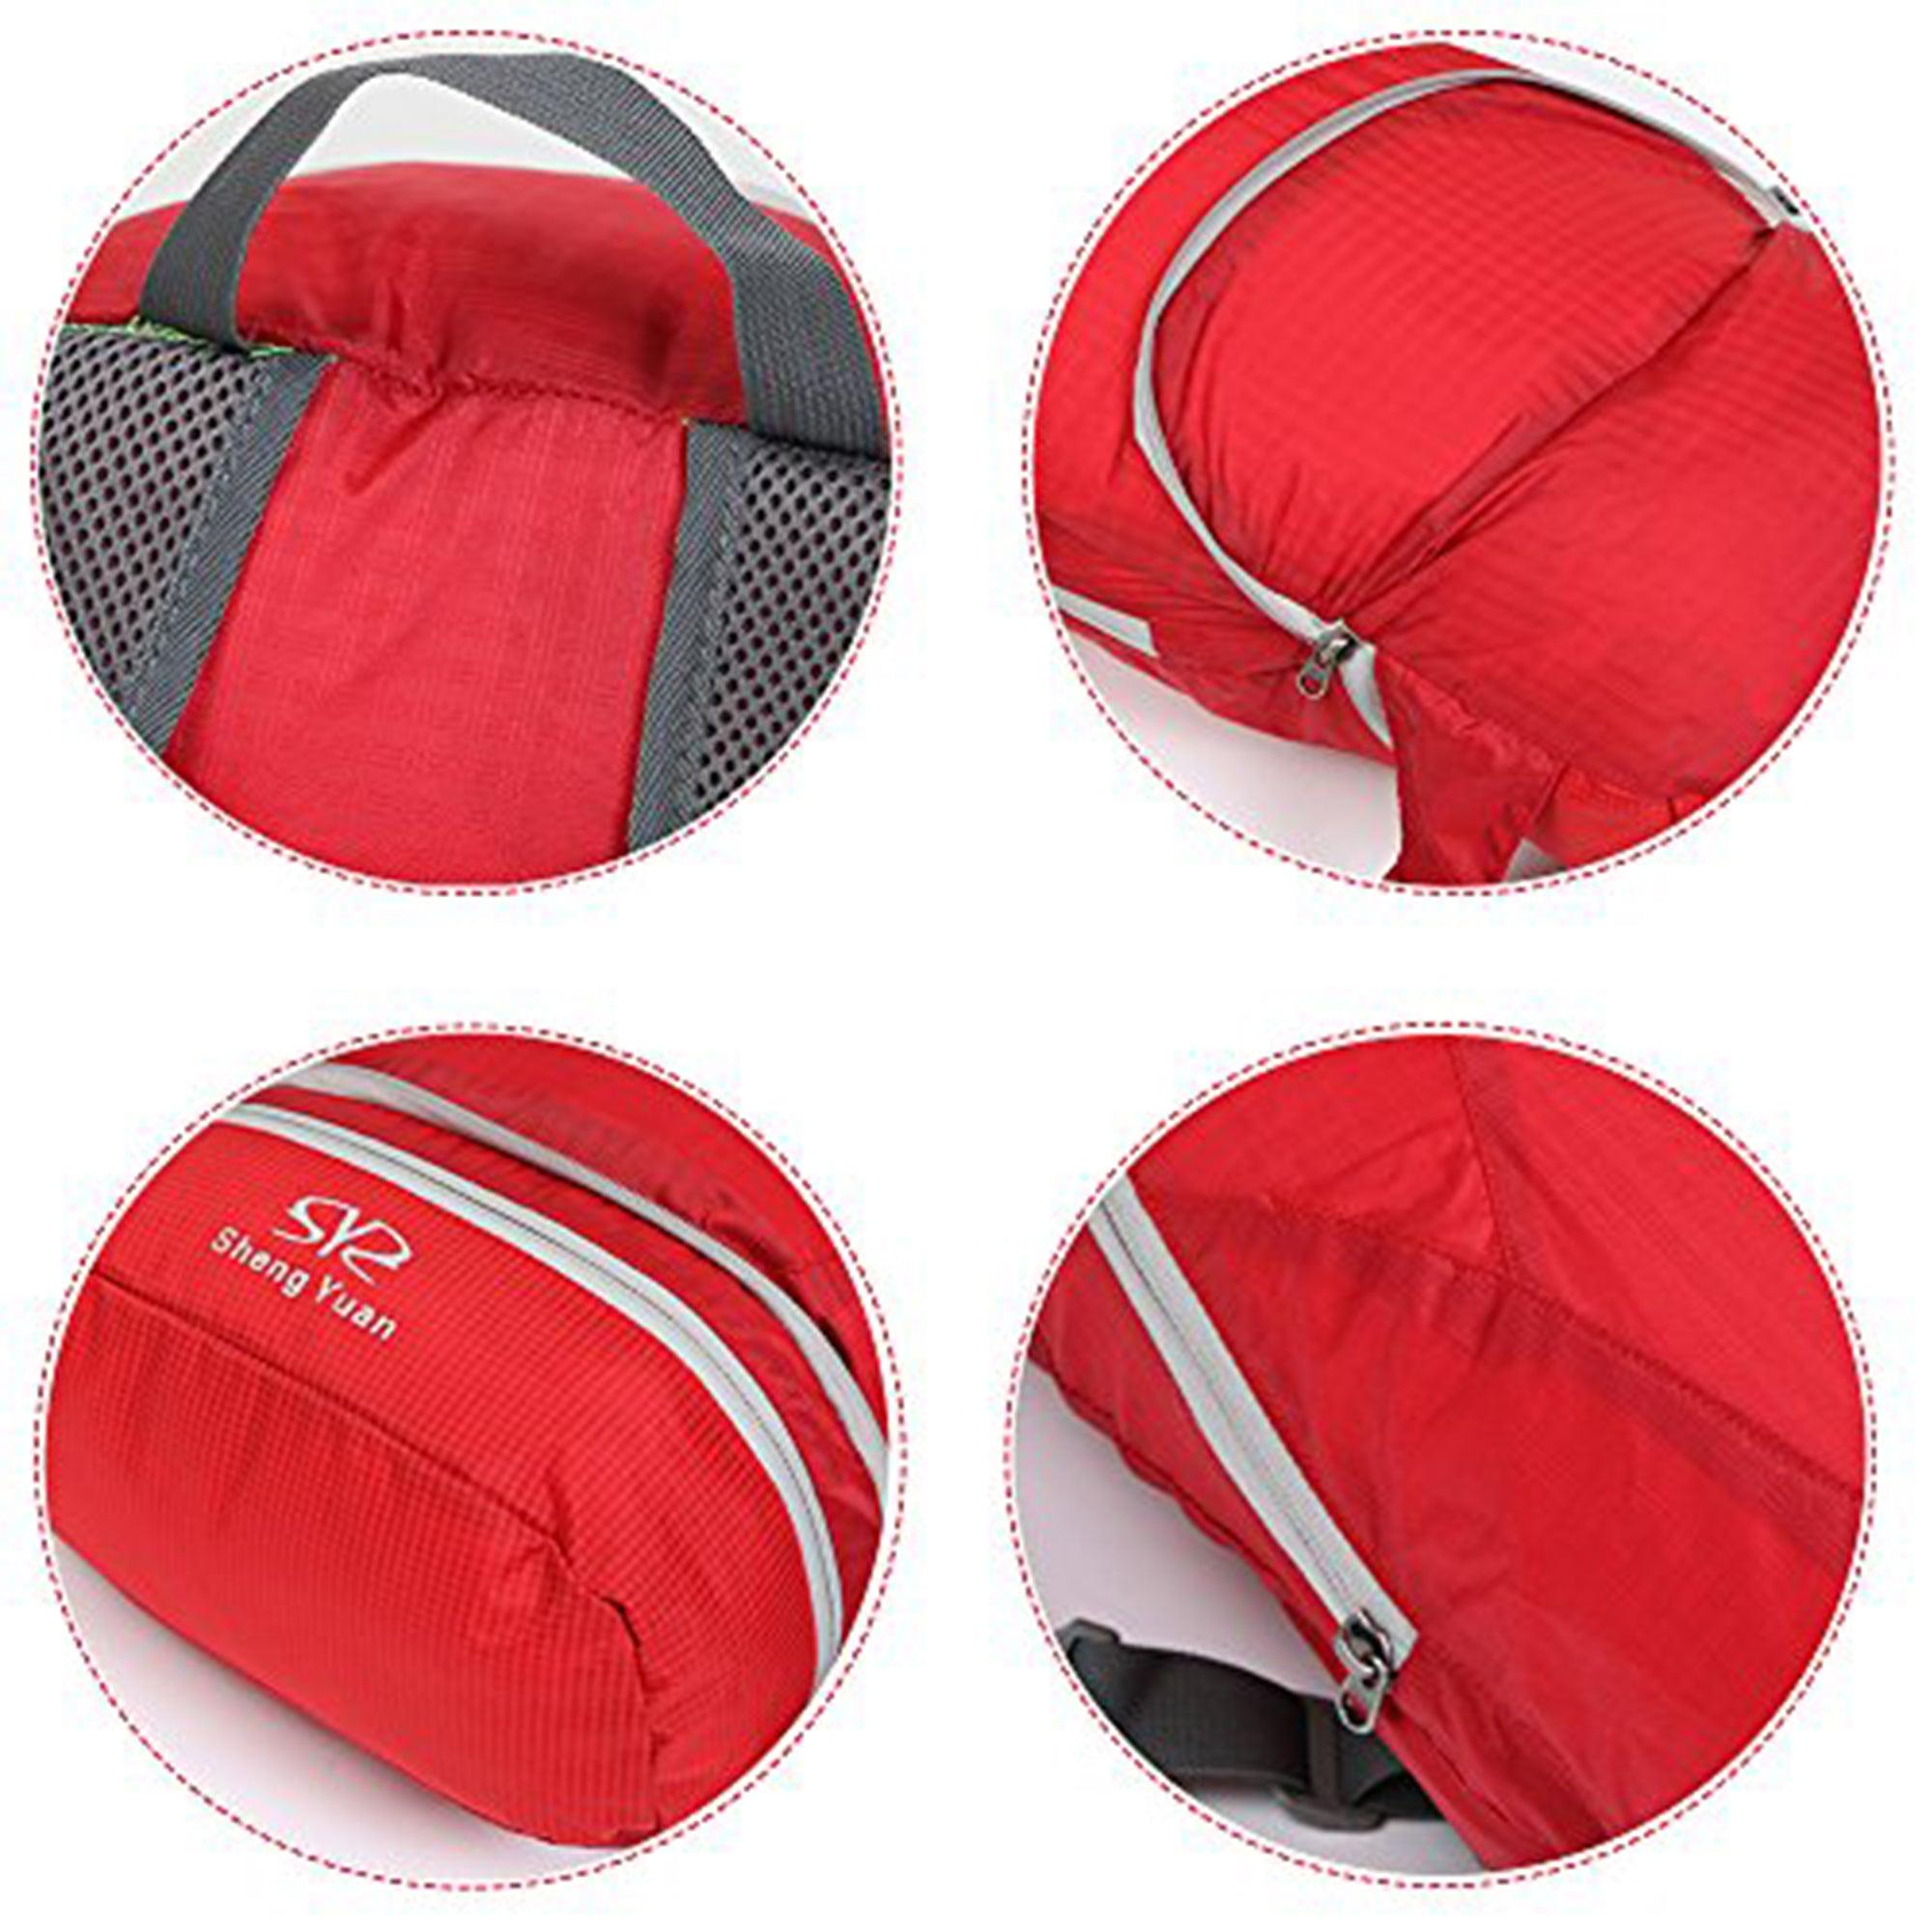 Foldable Hiking Backpack Lightweight Travel Outdoor Camping Daypack with a Waist Bag Pack, Red - Bosonshop